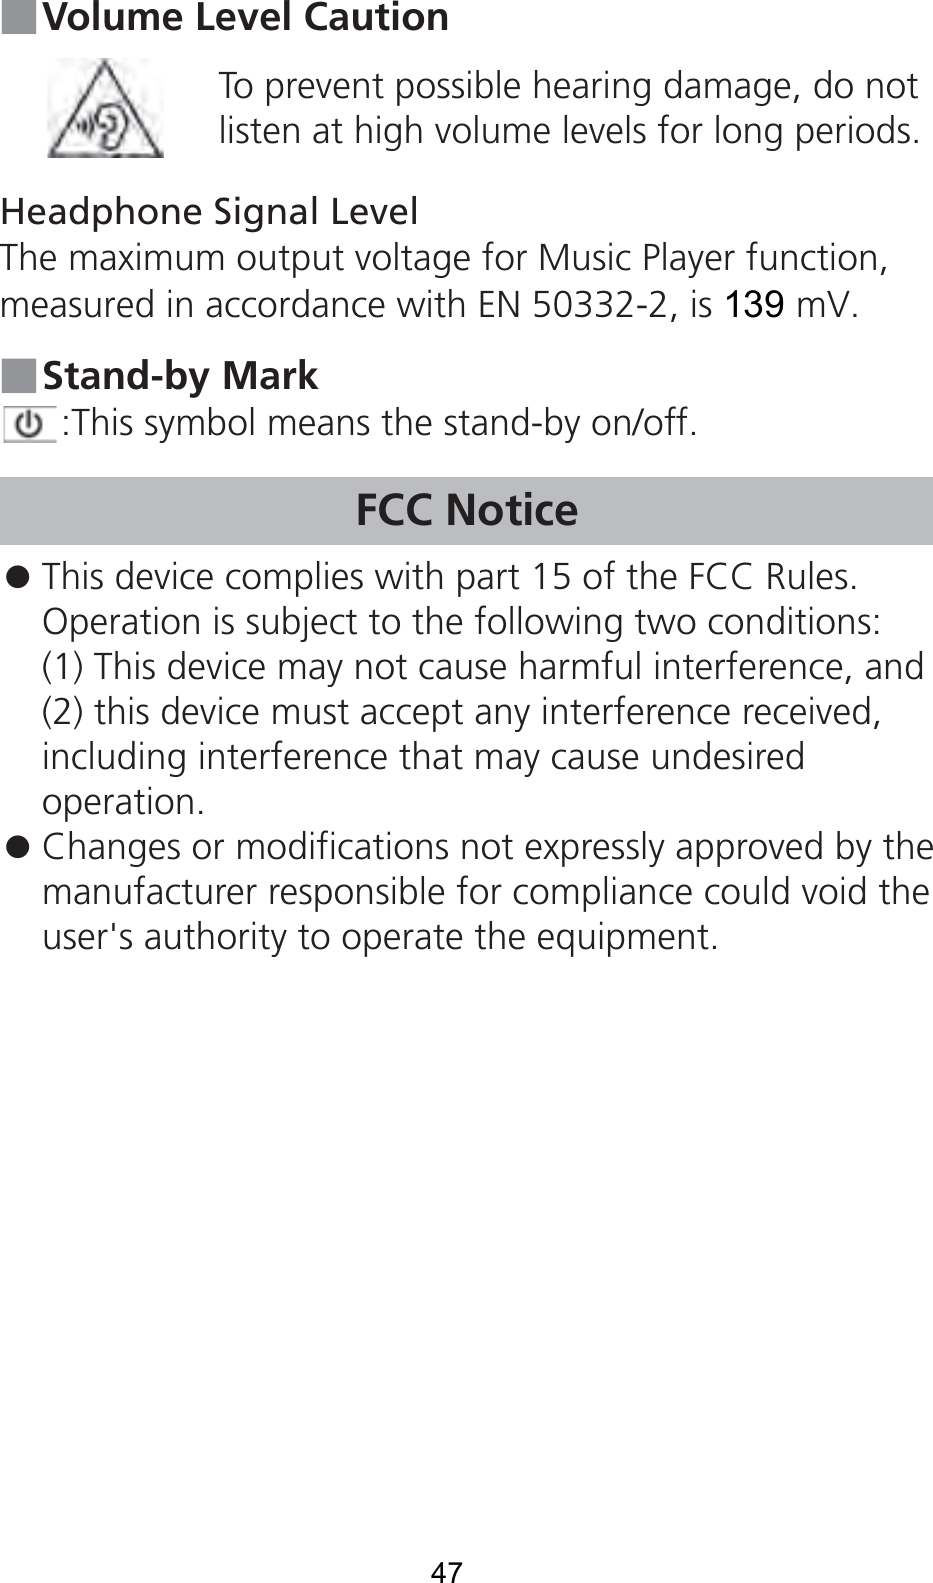 ■ Volume Level CautionTo prevent possible hearing damage, do not listen at high volume levels for long periods.Headphone Signal LevelThe maximum output voltage for Music Player function, measured in accordance with EN 50332-2, is 139 mV.■ Stand-by Mark:This symbol means the stand-by on/off.FCC Notice󱛠 This device complies with part 15 of the FCC Rules.Operation is subject to the following two conditions:(1) This device may not cause harmful interference, and(2) this device must accept any interference received,including interference that may cause undesiredoperation.󱛠 Changes or modifications not expressly approved by themanufacturer responsible for compliance could void theuser&apos;s authority to operate the equipment.47